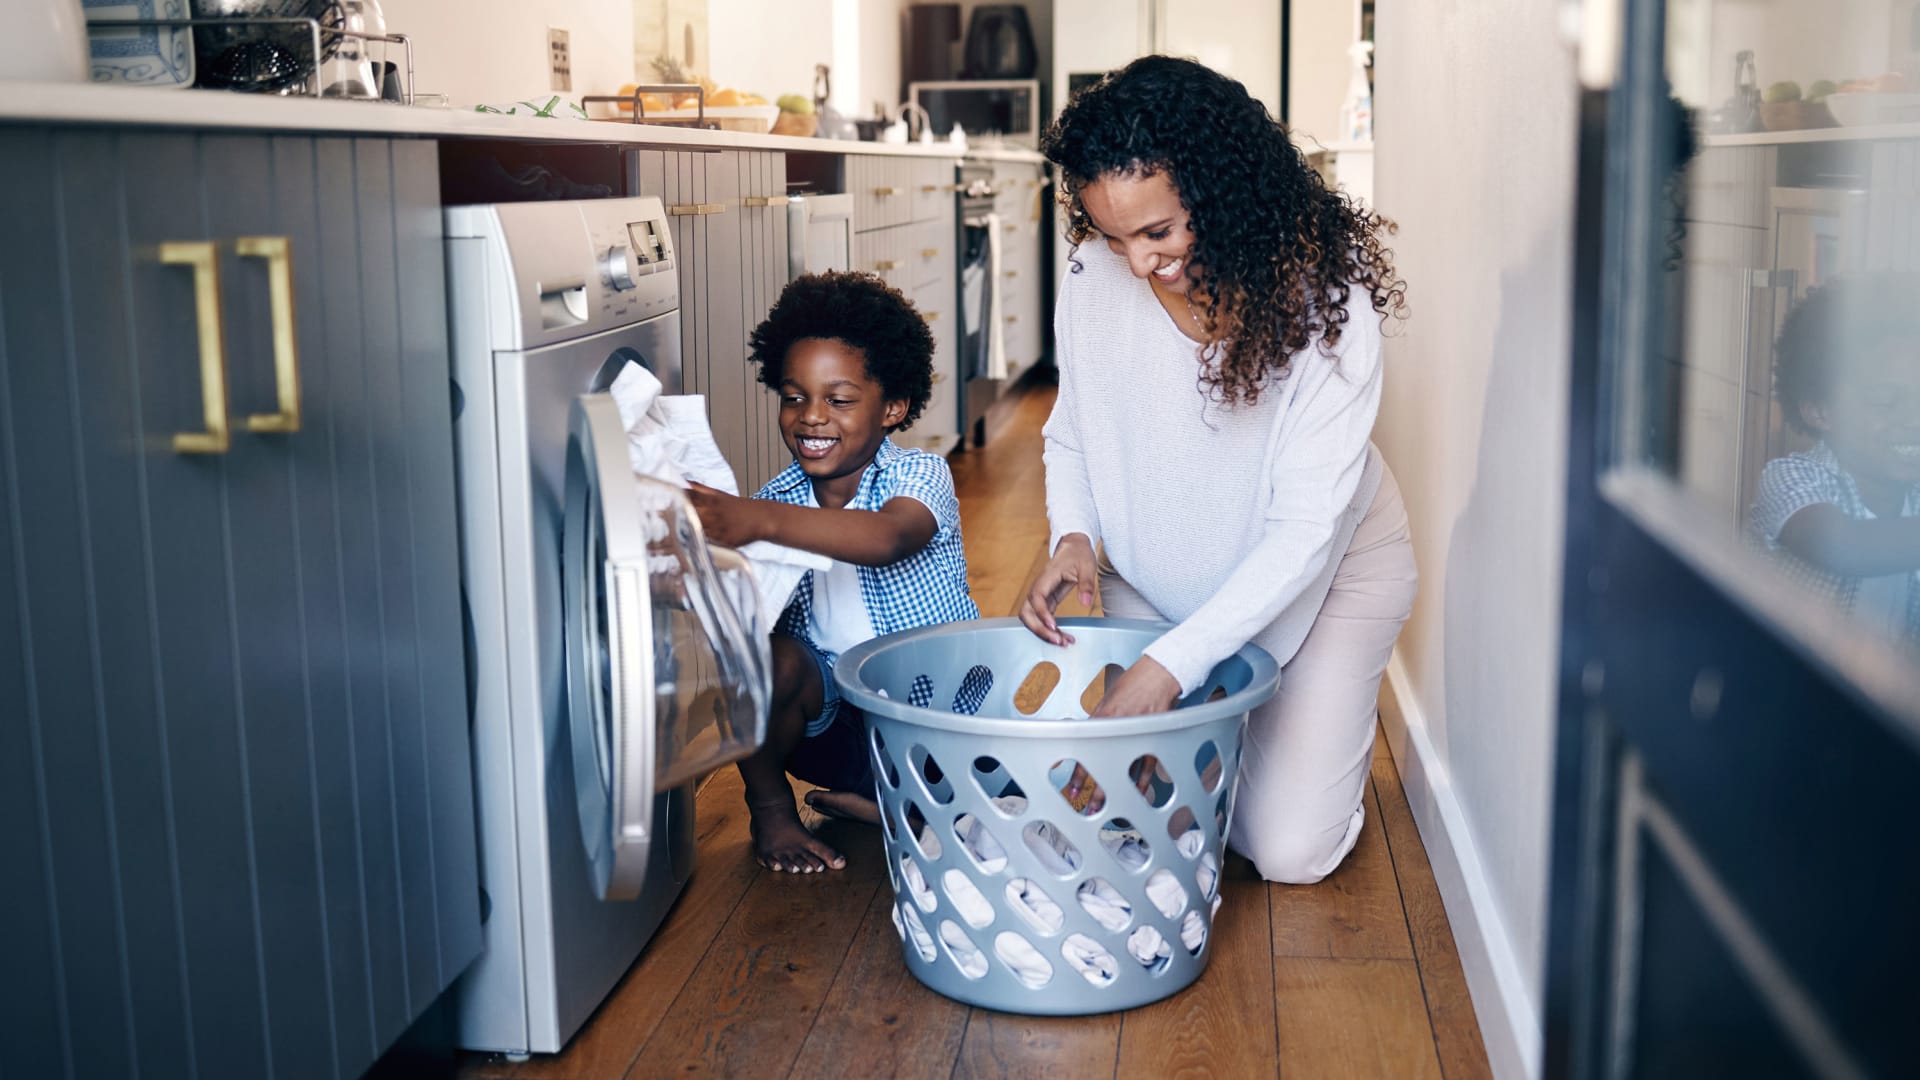 Kids Who Do Chores Are More Successful Adults, According to Science. (There's Just 1 Catch)